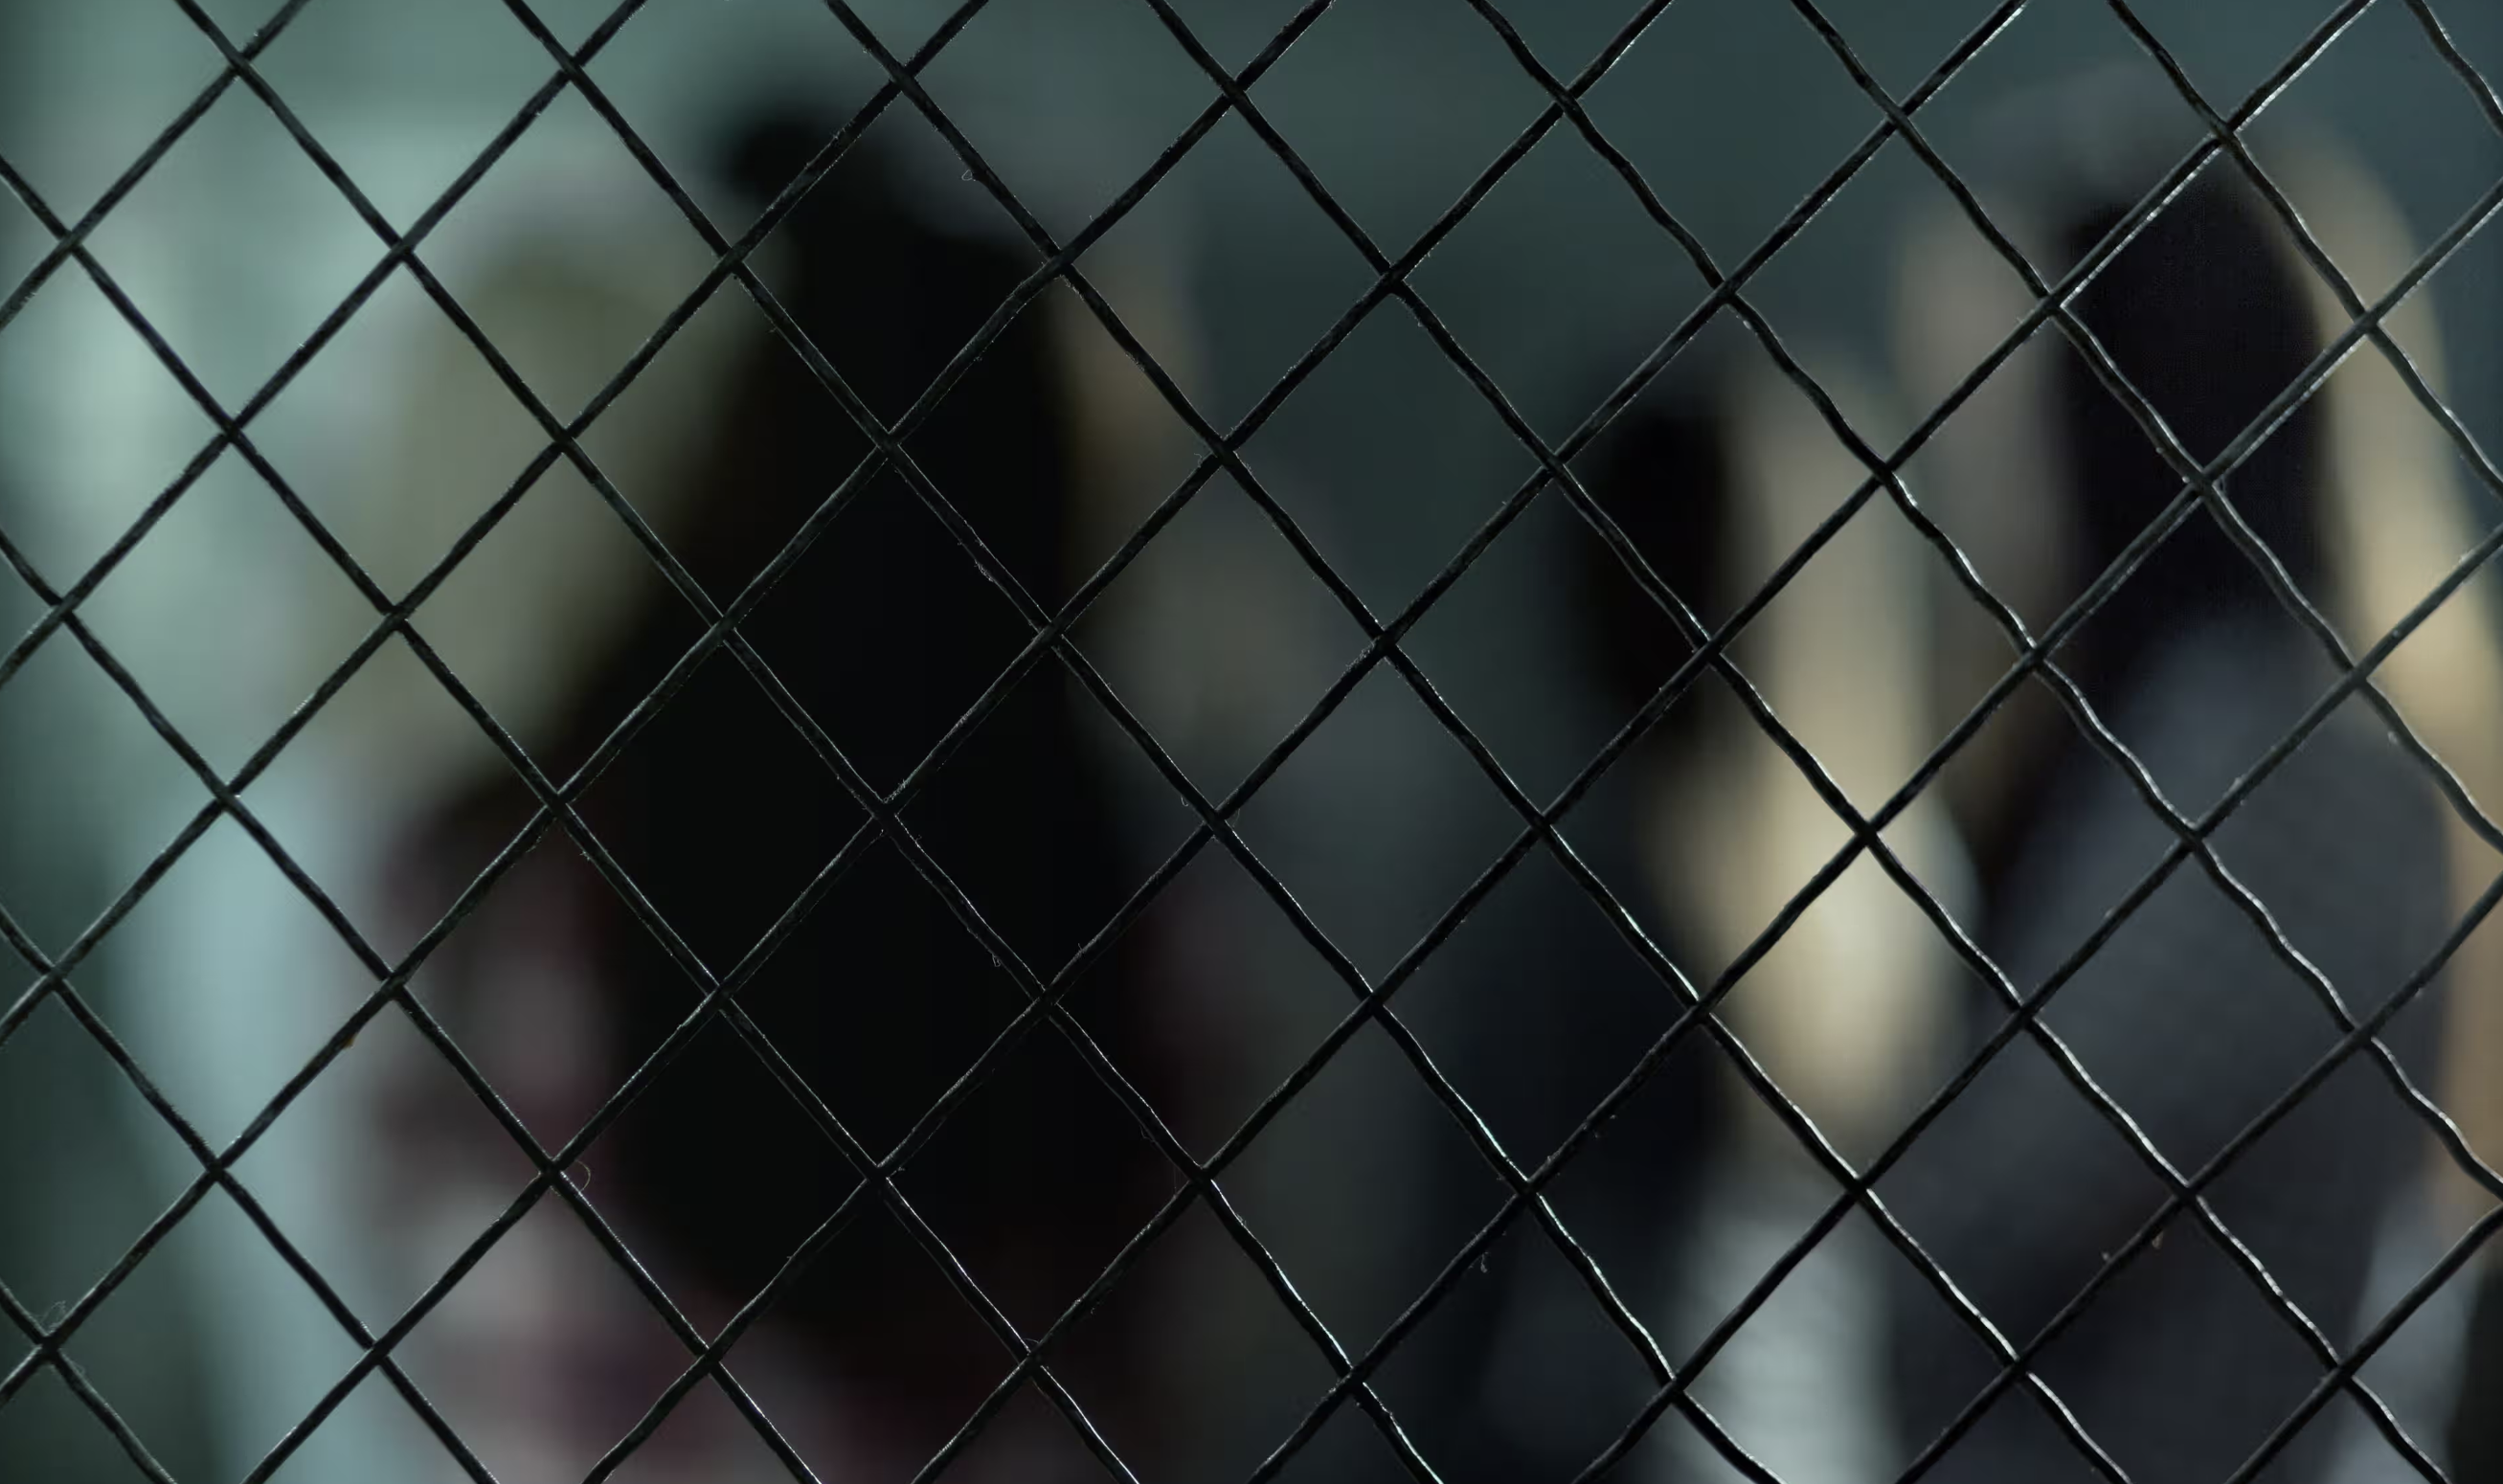 Image of individuals blurred behind fenced bars.